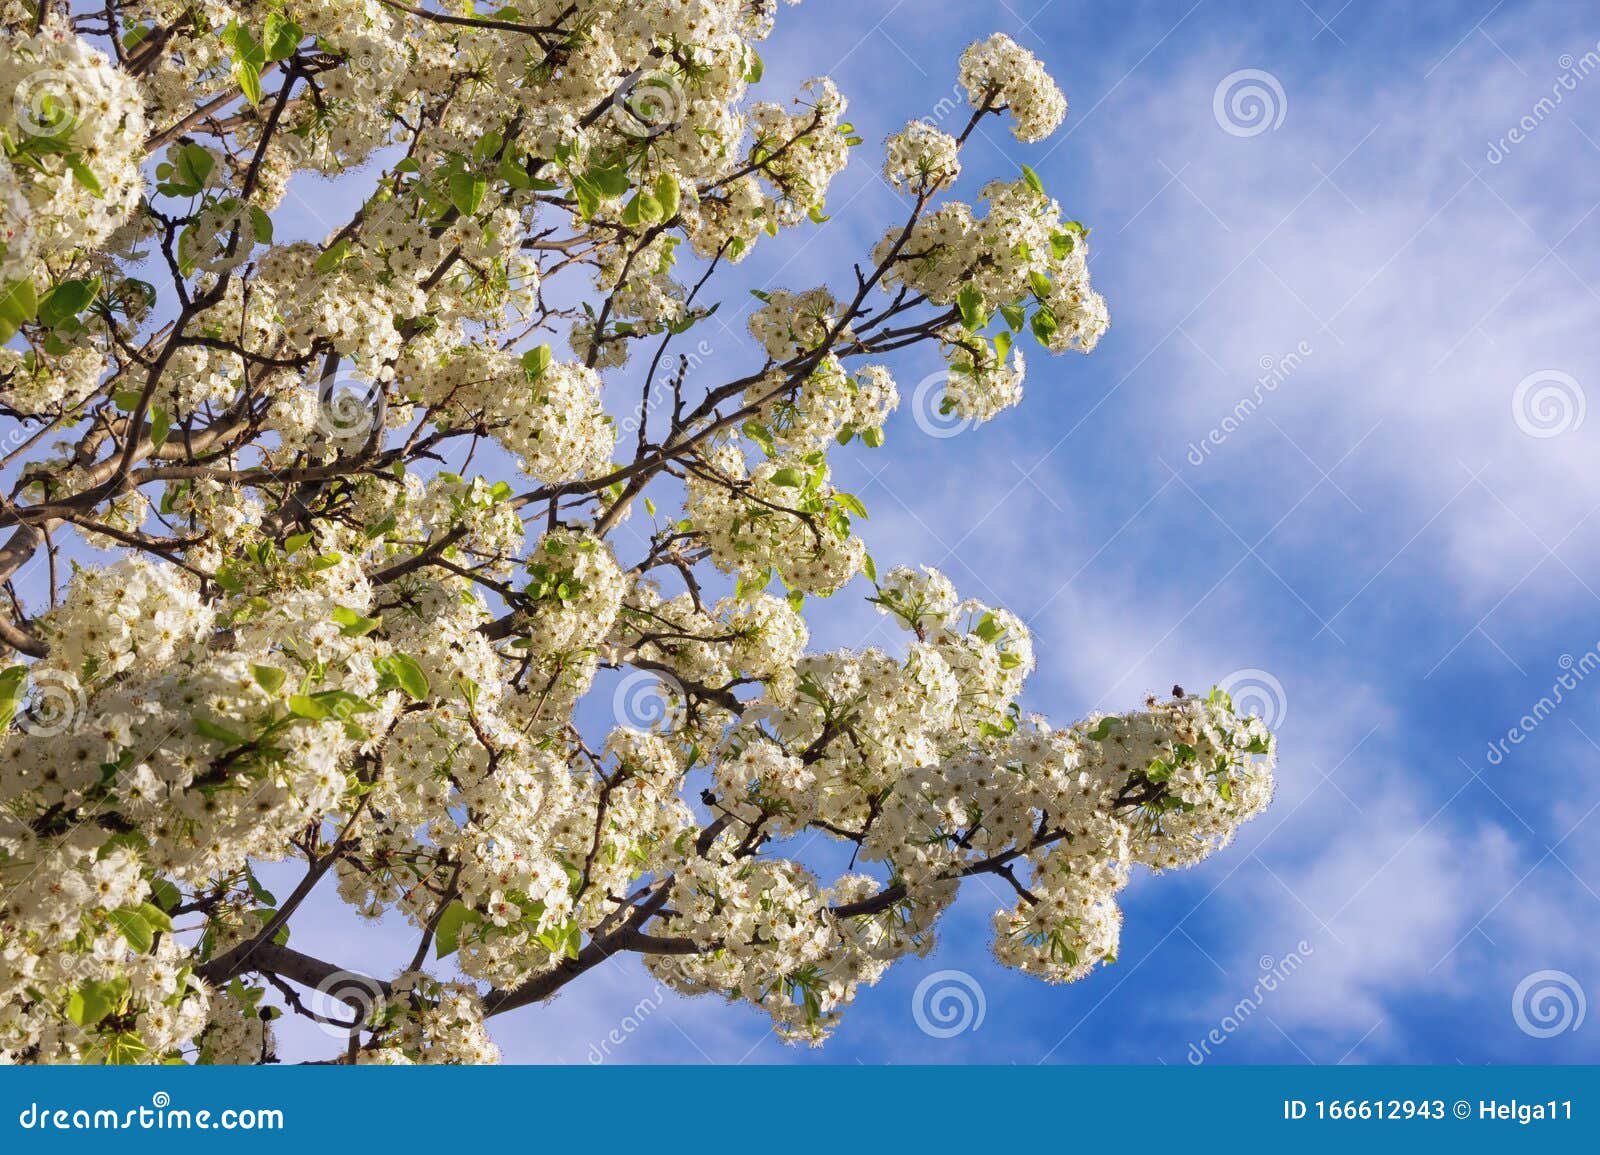 Springtime. Branches of Flowering Tree Against Blue Sky with White